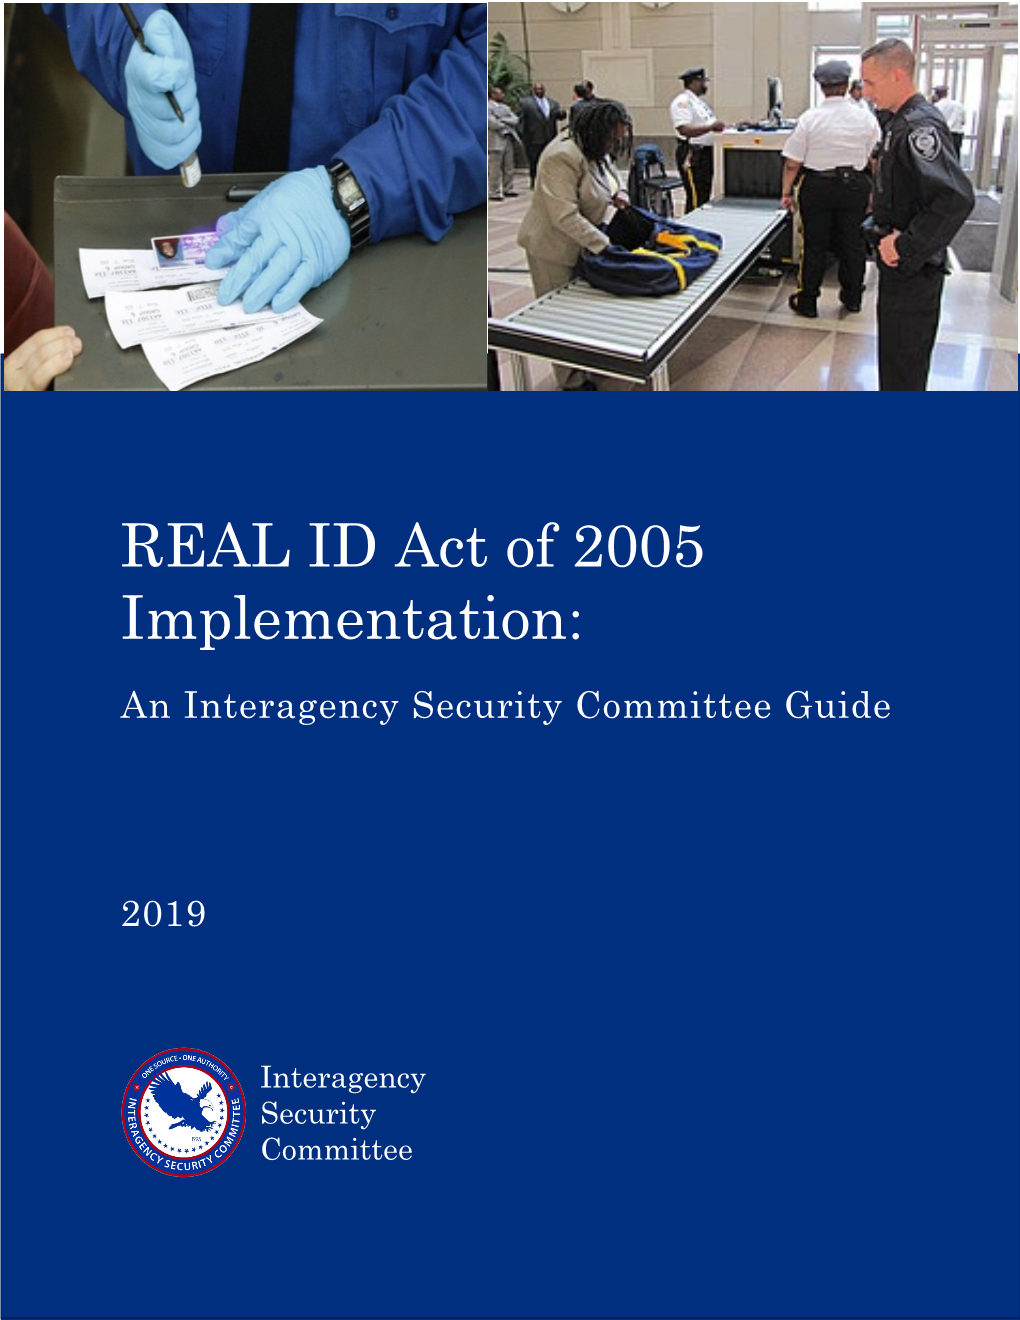 REAL ID Act of 2005 Implementation: an Interagency Security Committee Guide